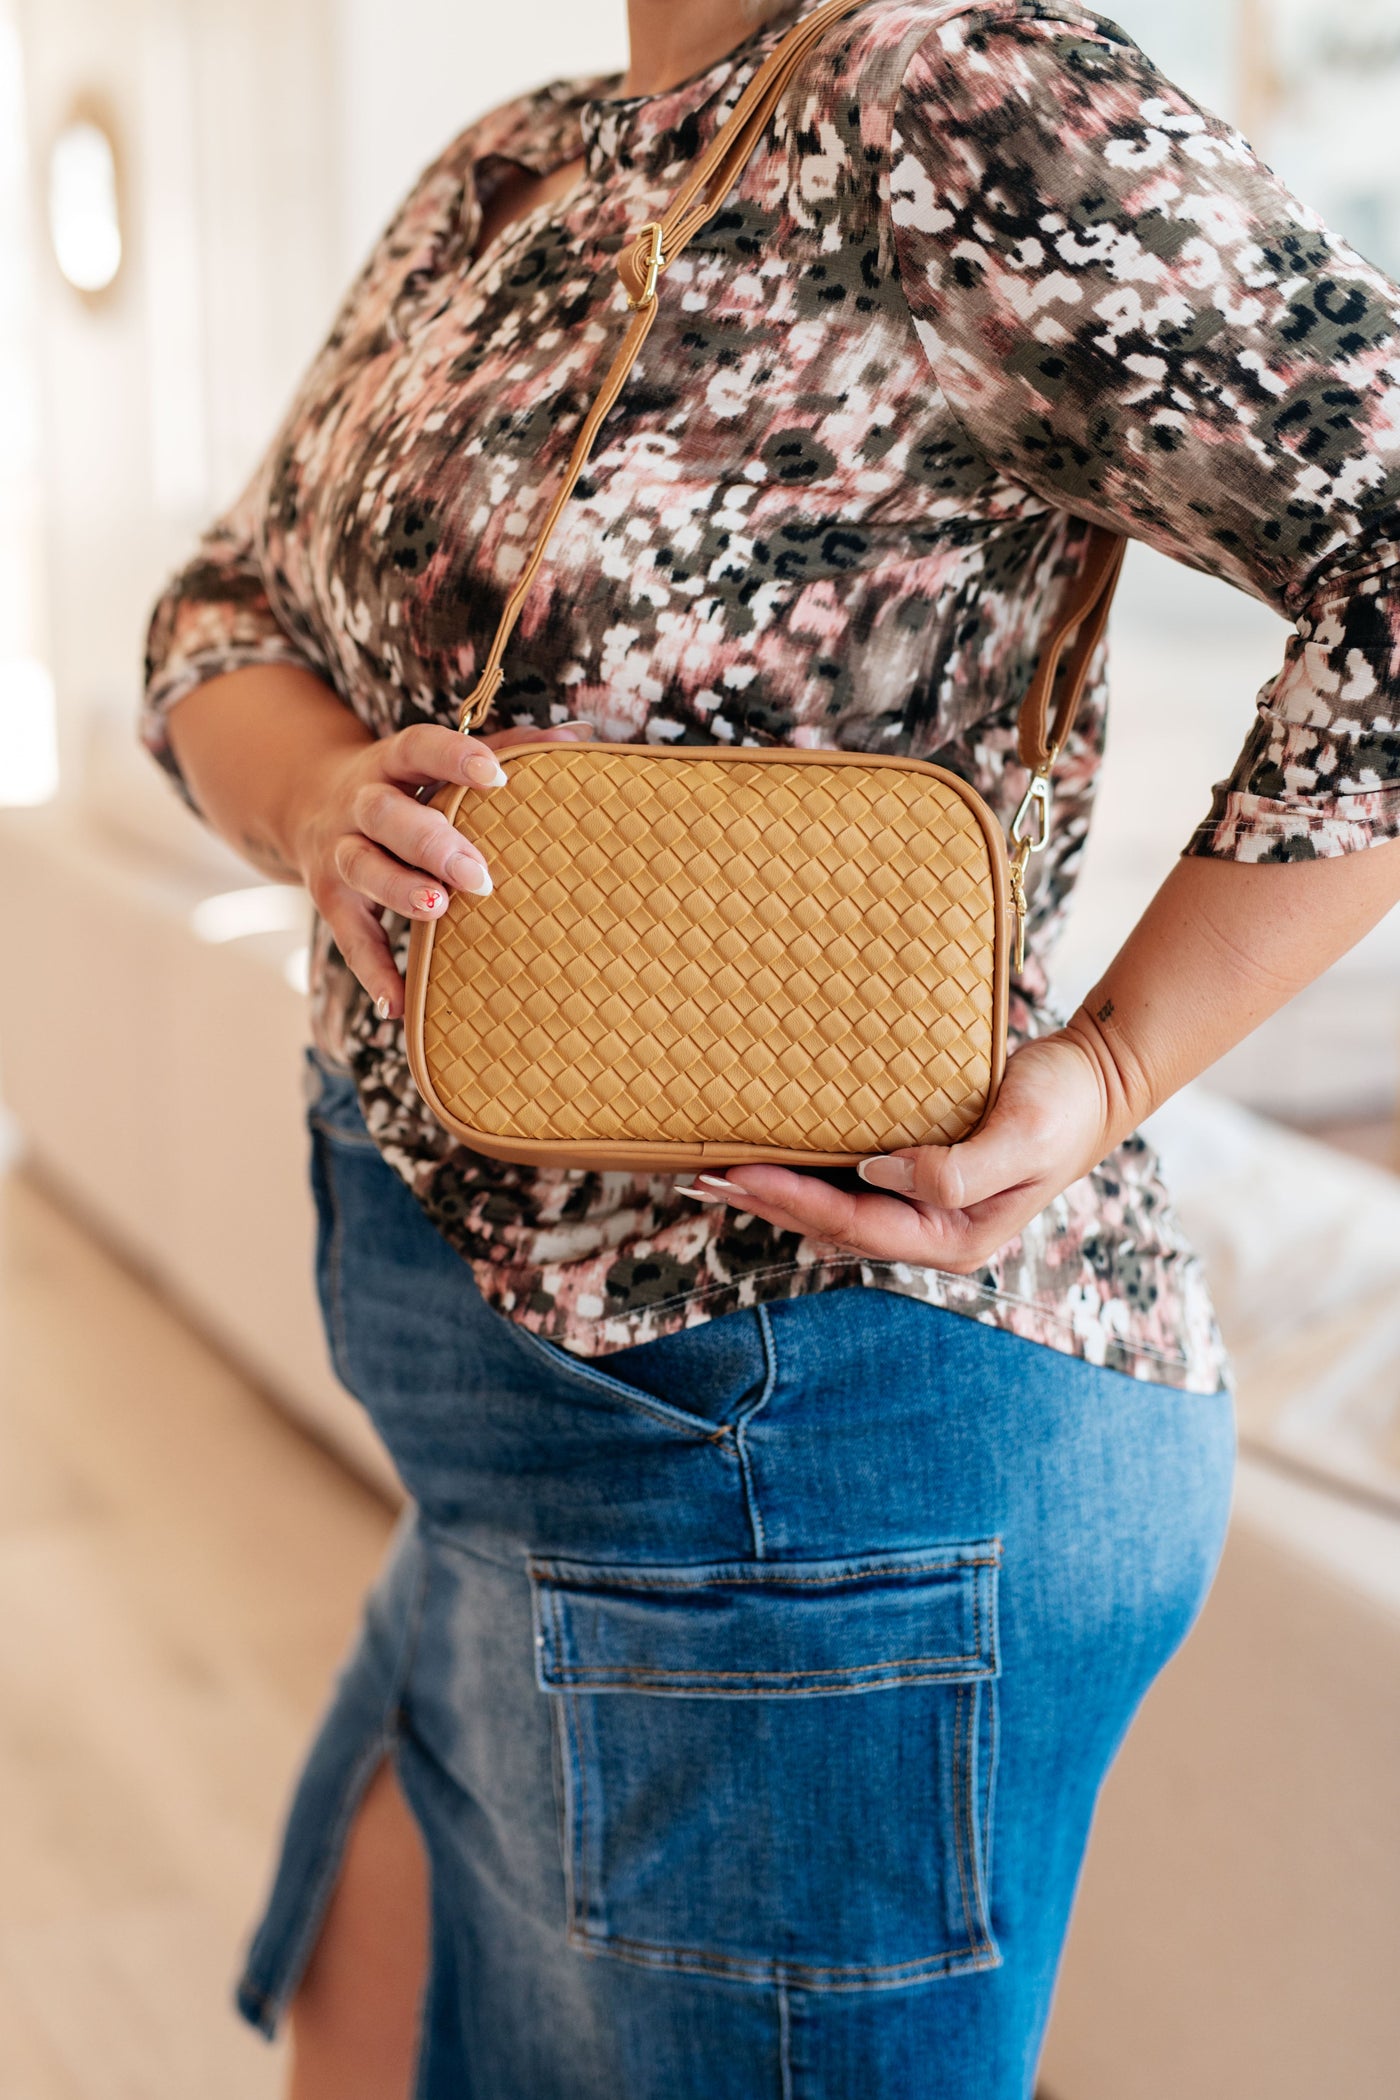 Its woven leather pattern and vegan leather material add a touch of sophistication, while the zippered closure and two interior pockets provide practicality